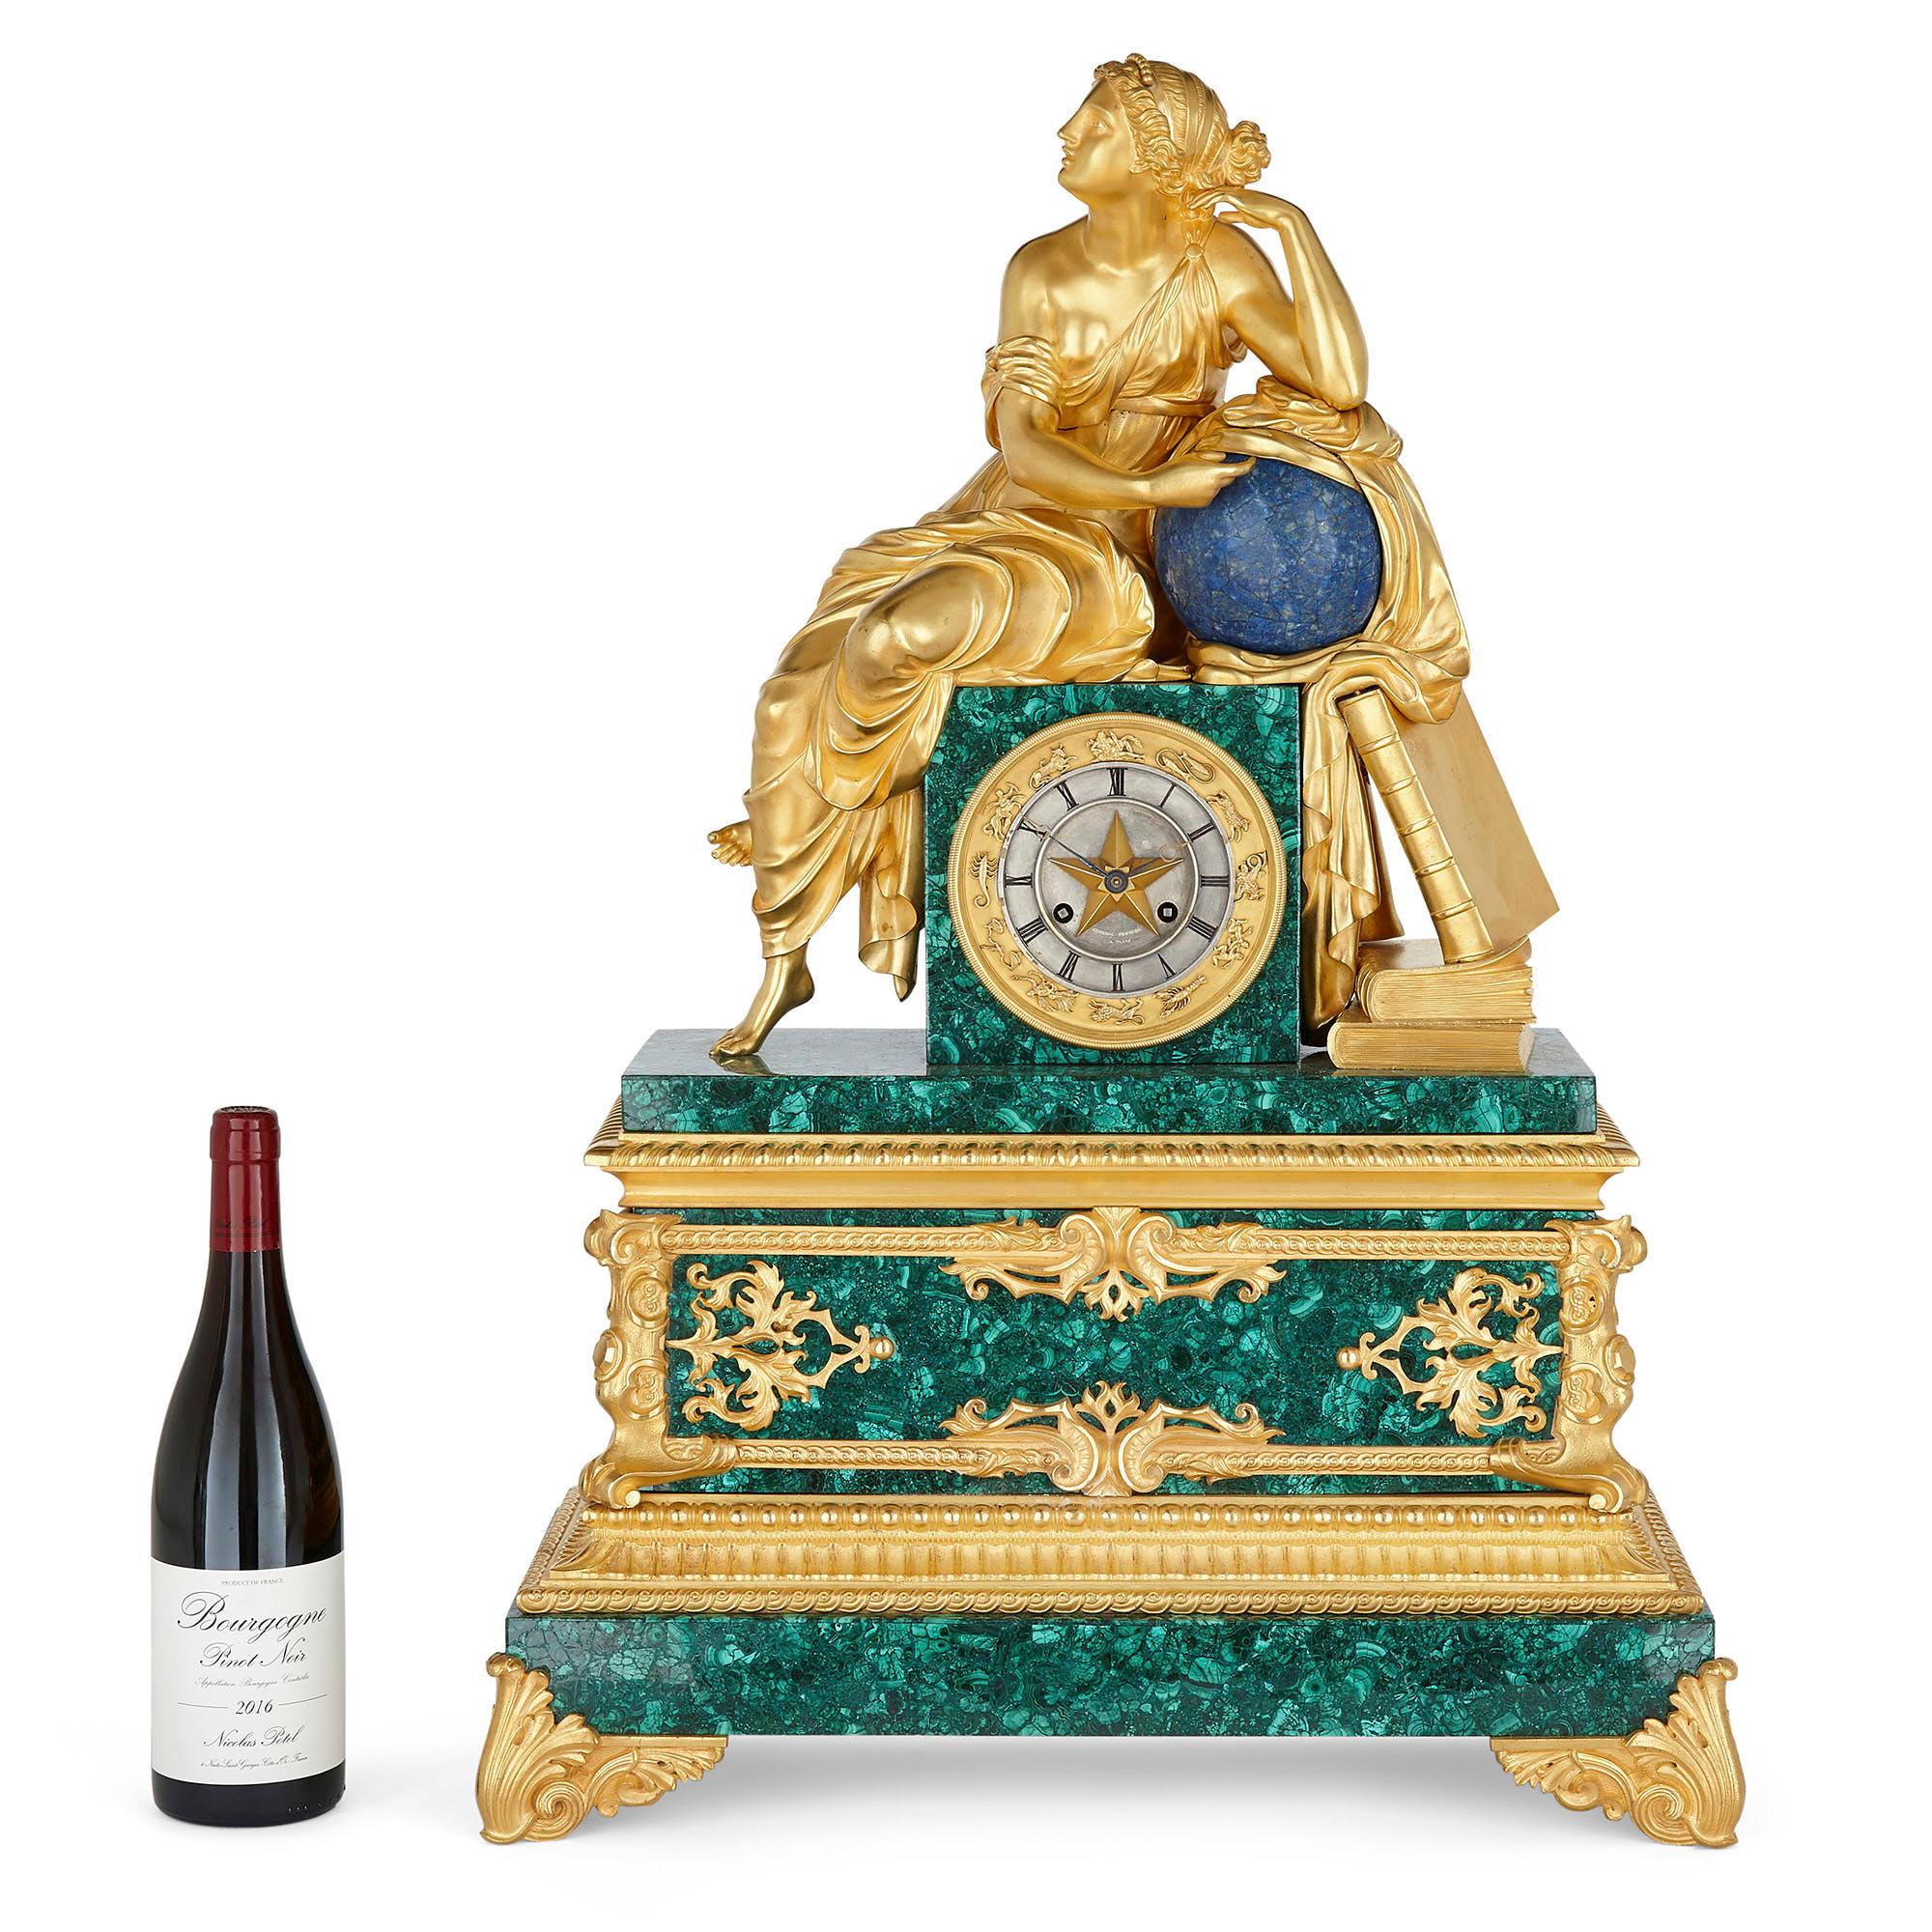 French Charles X malachite, lapis lazuli, and gilt bronze figurative clock
French, c. 1830
Measures: Height 75cm, width 53cm, depth 23cm

This fine mantel clock is a superb example of the Charles X style. The clock, wrought from malachite, lapis